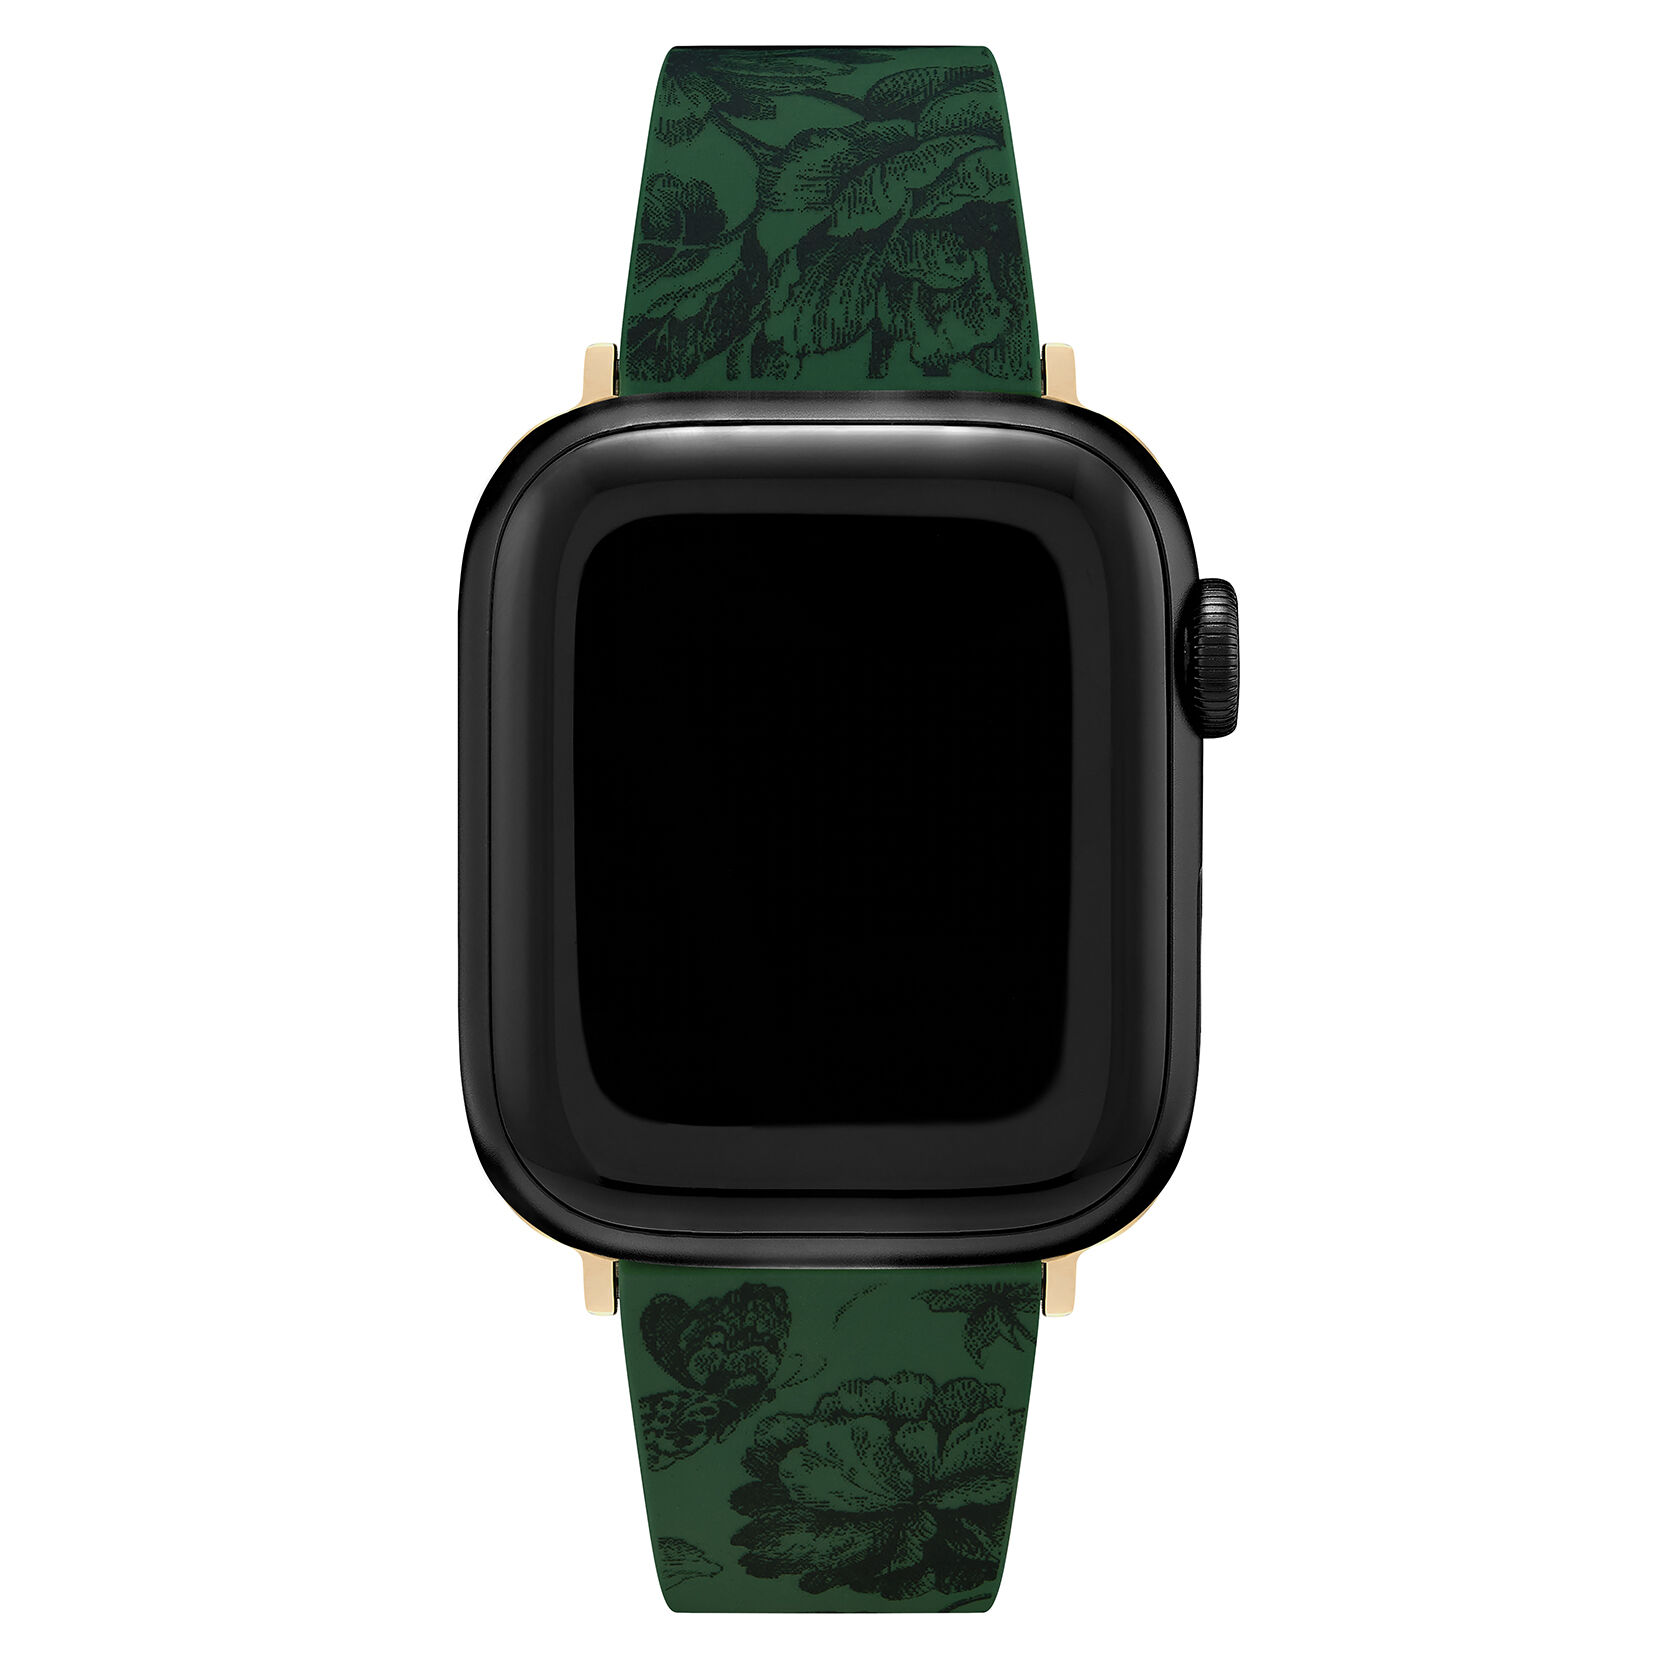 Apple Watch SE 2 Prices Drop as Low as $189 for a Limited Time - CNET